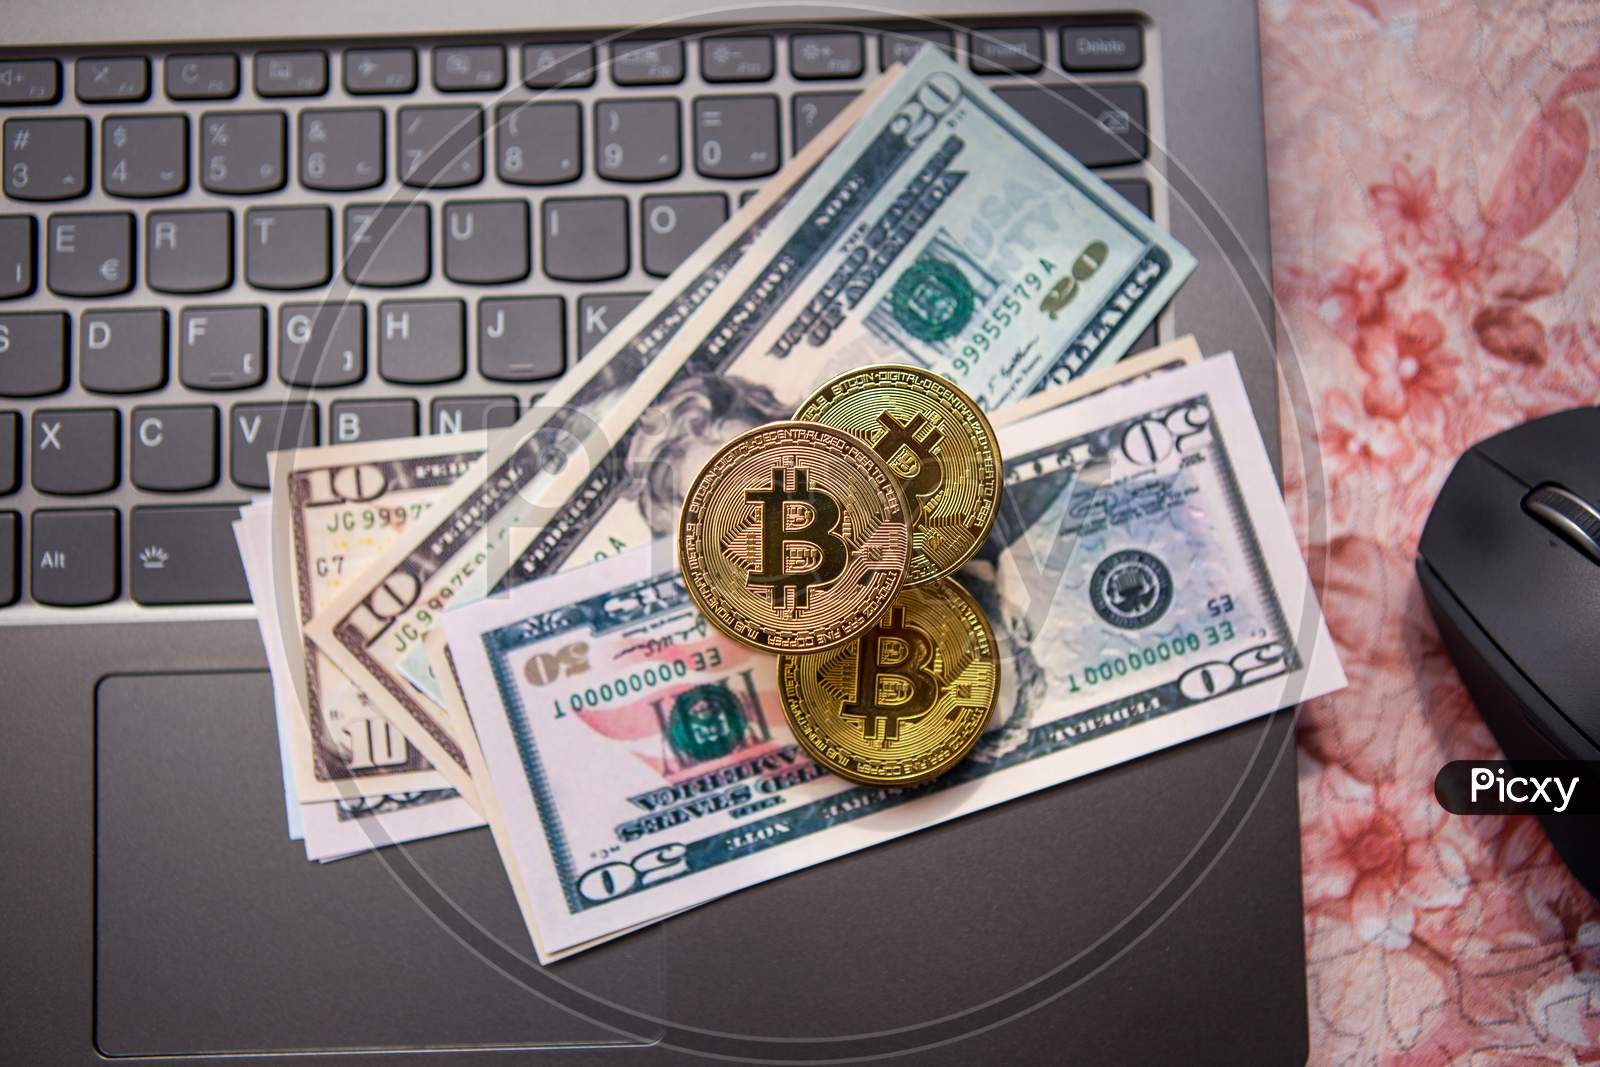 Bitcoin Gold Coins And Several Us Dollar Bills Are On A Laptop Keyboard.